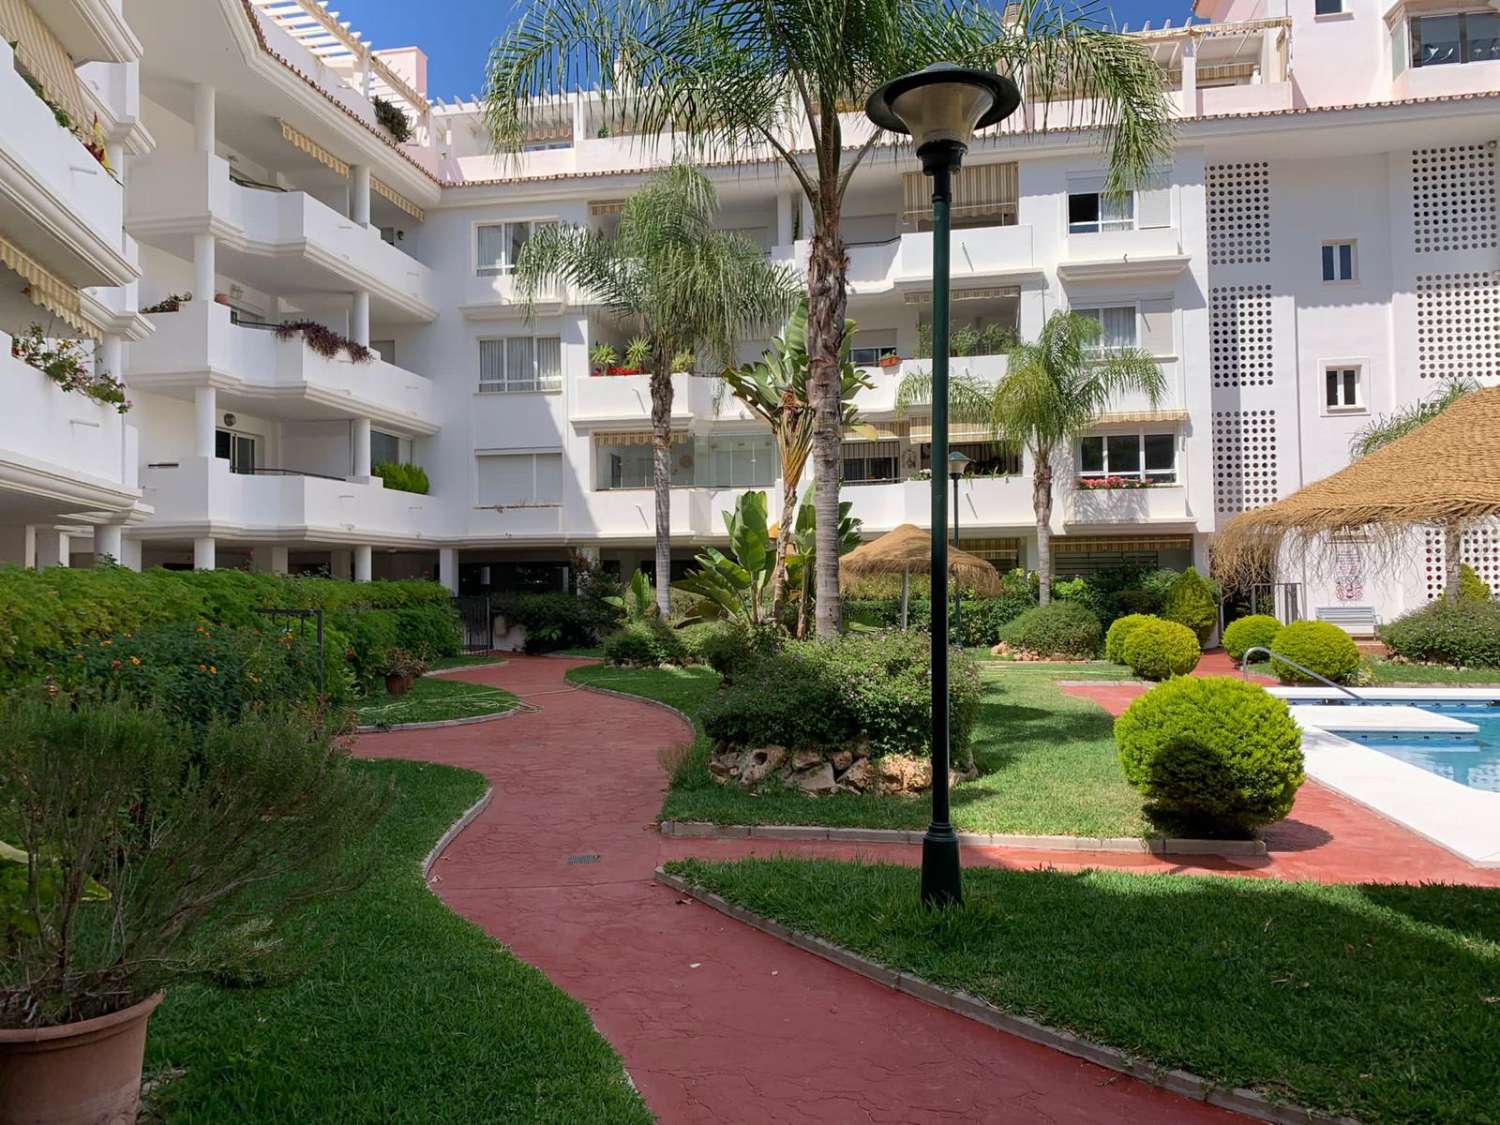 MID-SEASON . FOR RENT FROM 1.1O.23-31.5.24 NICE APARTMENT IN 2ND LINE BEACH IN LA CARIHUELA (TORREMOLINOS)